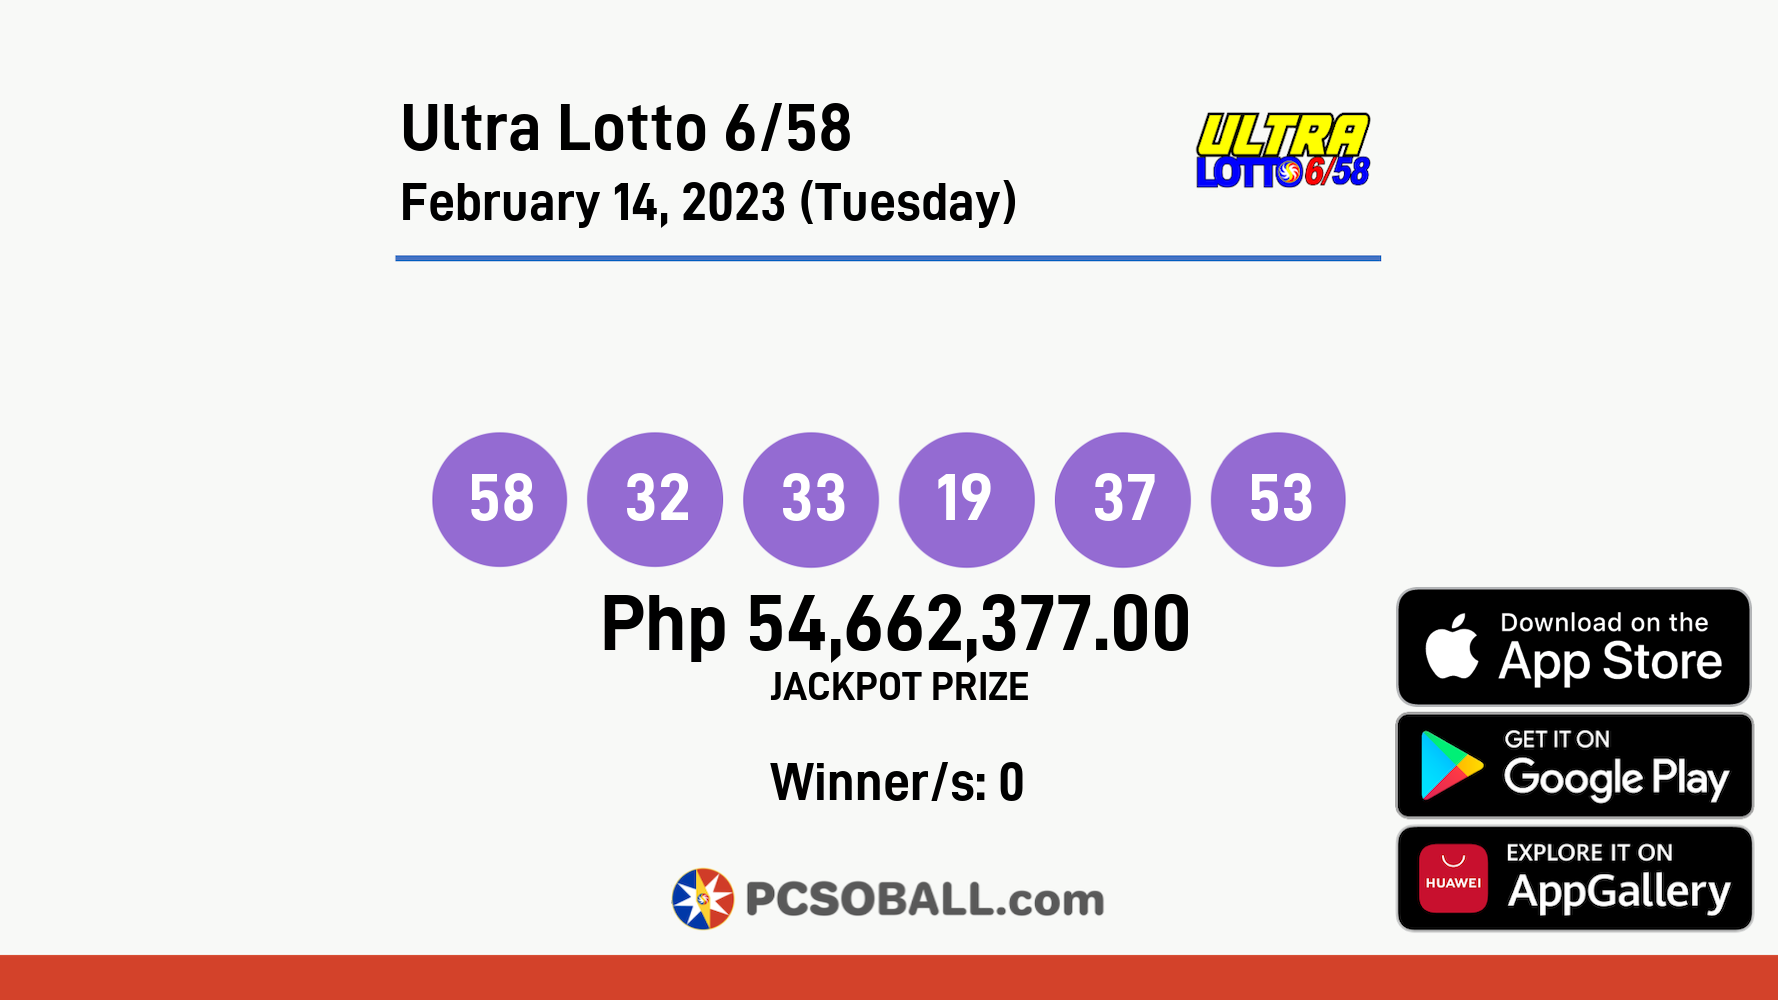 Ultra Lotto 6/58 February 14, 2023 (Tuesday) Result